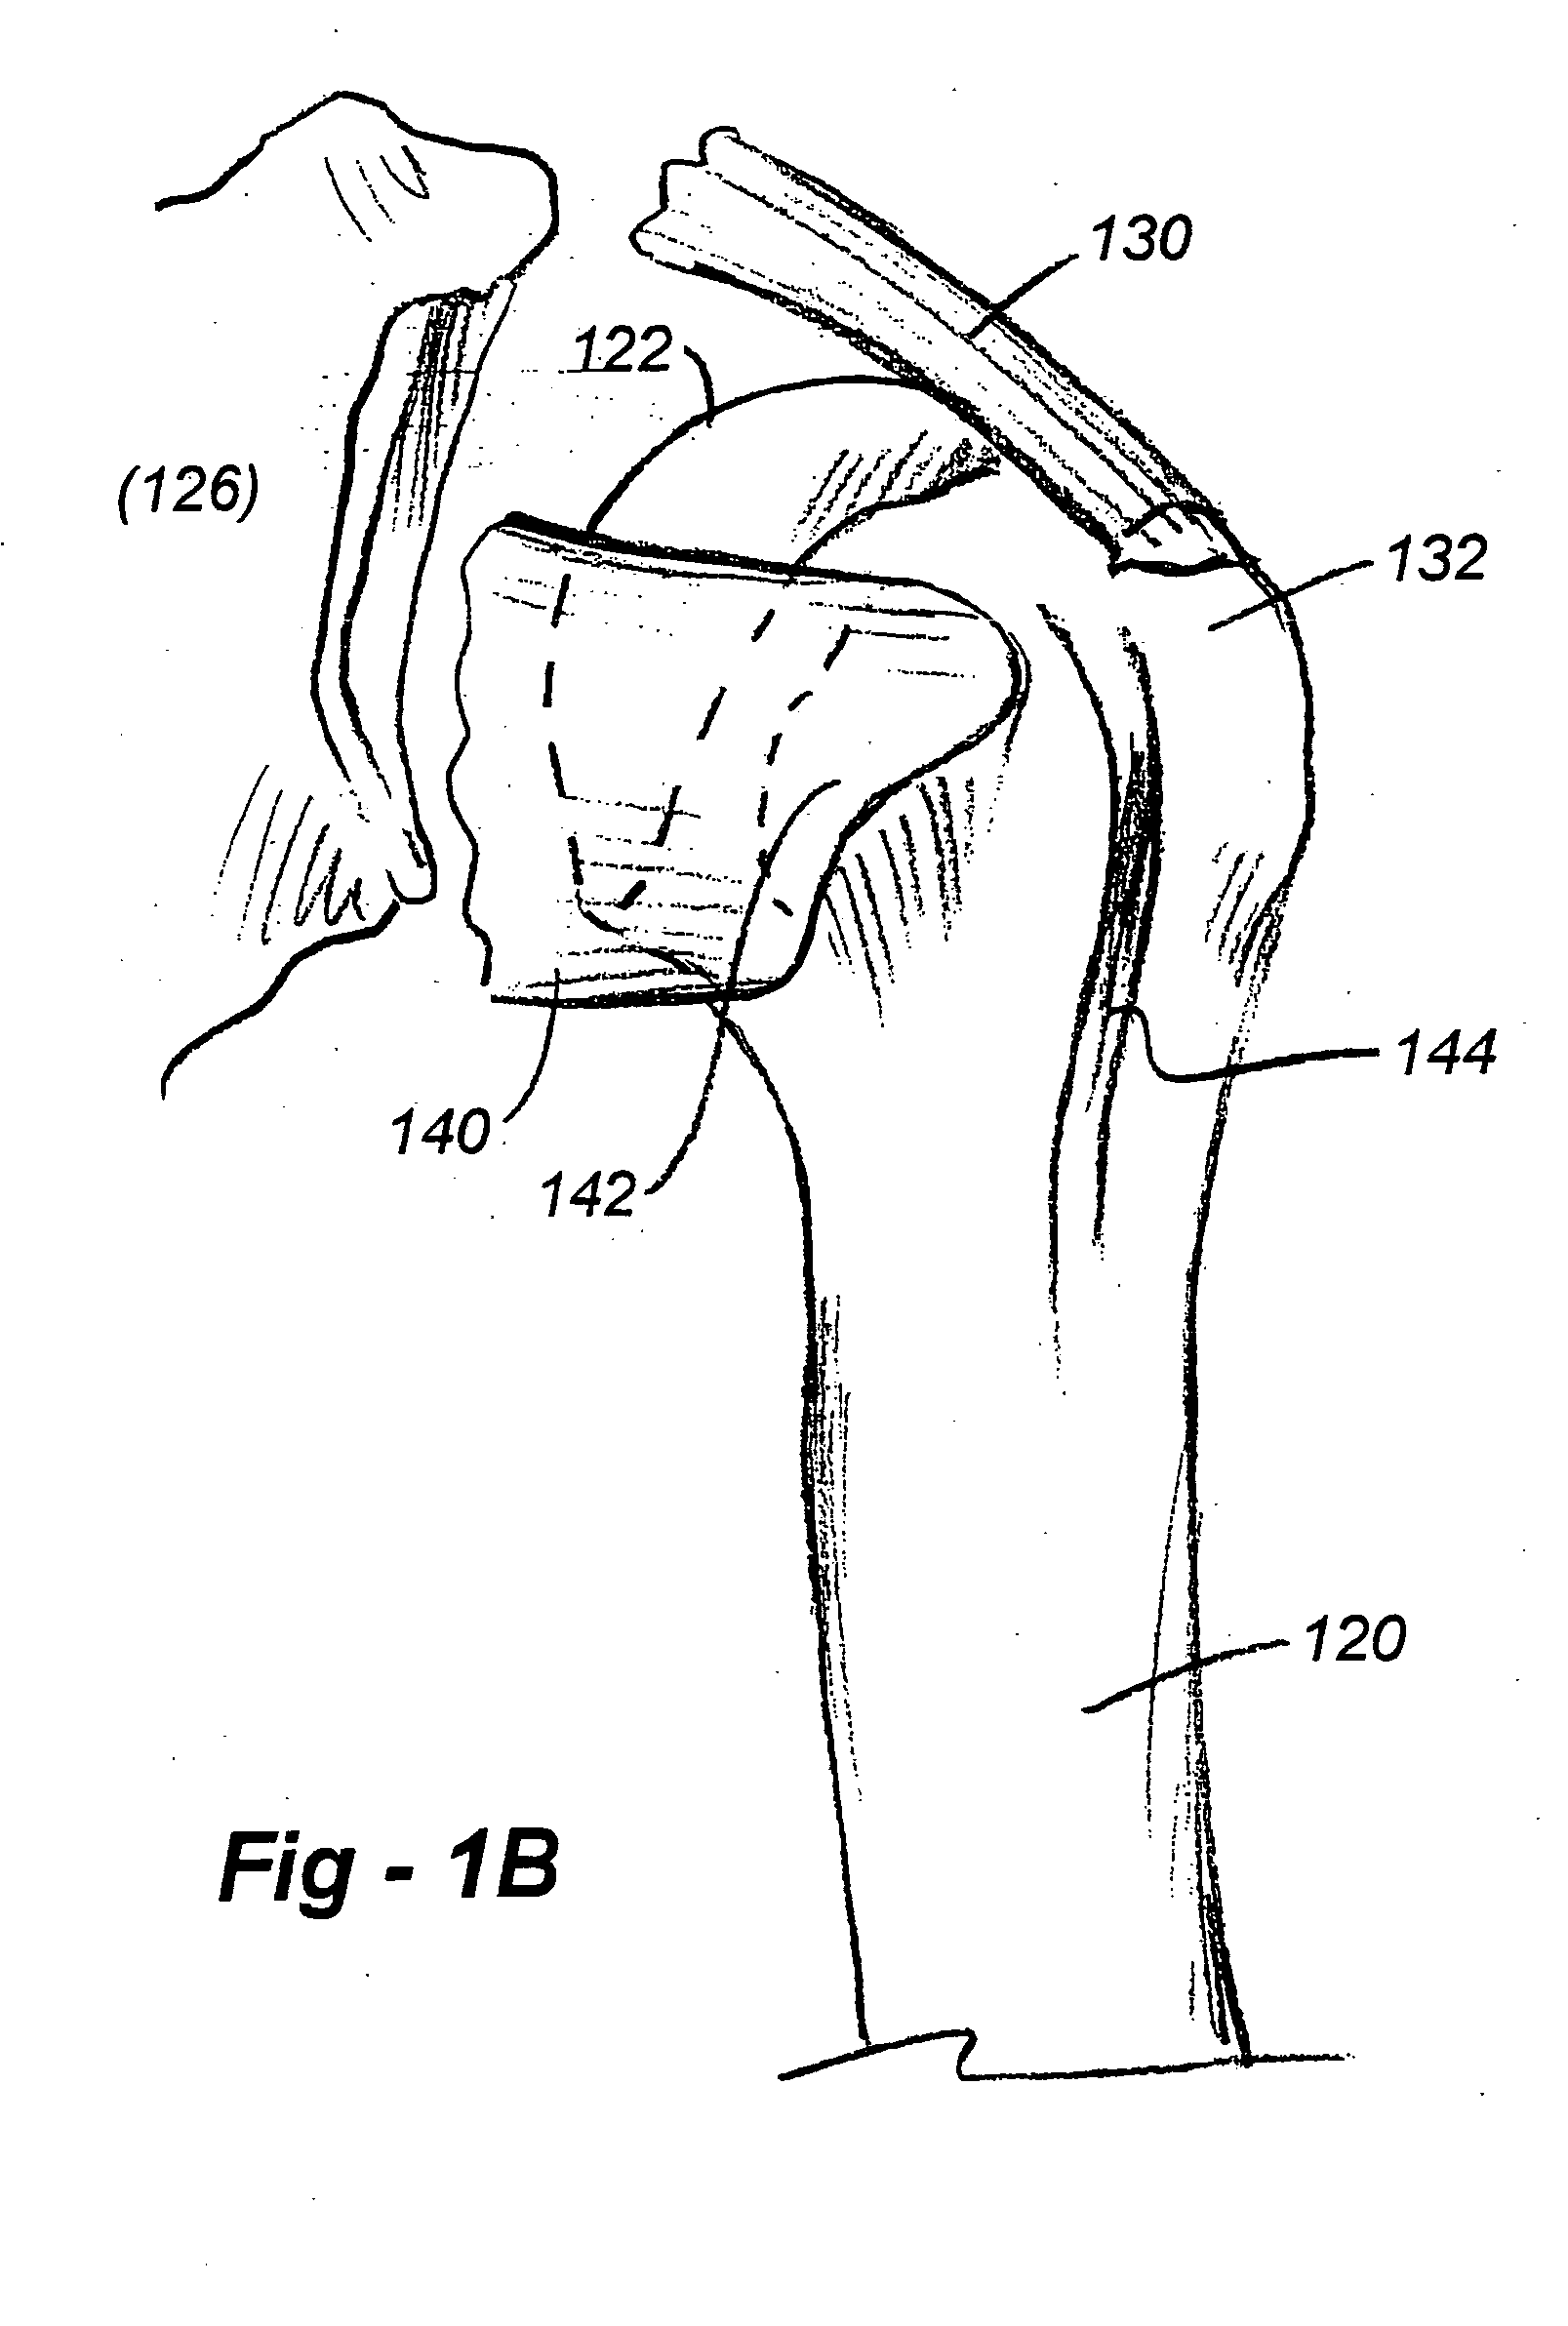 Shoulder prosthesis with anatomic reattachment features